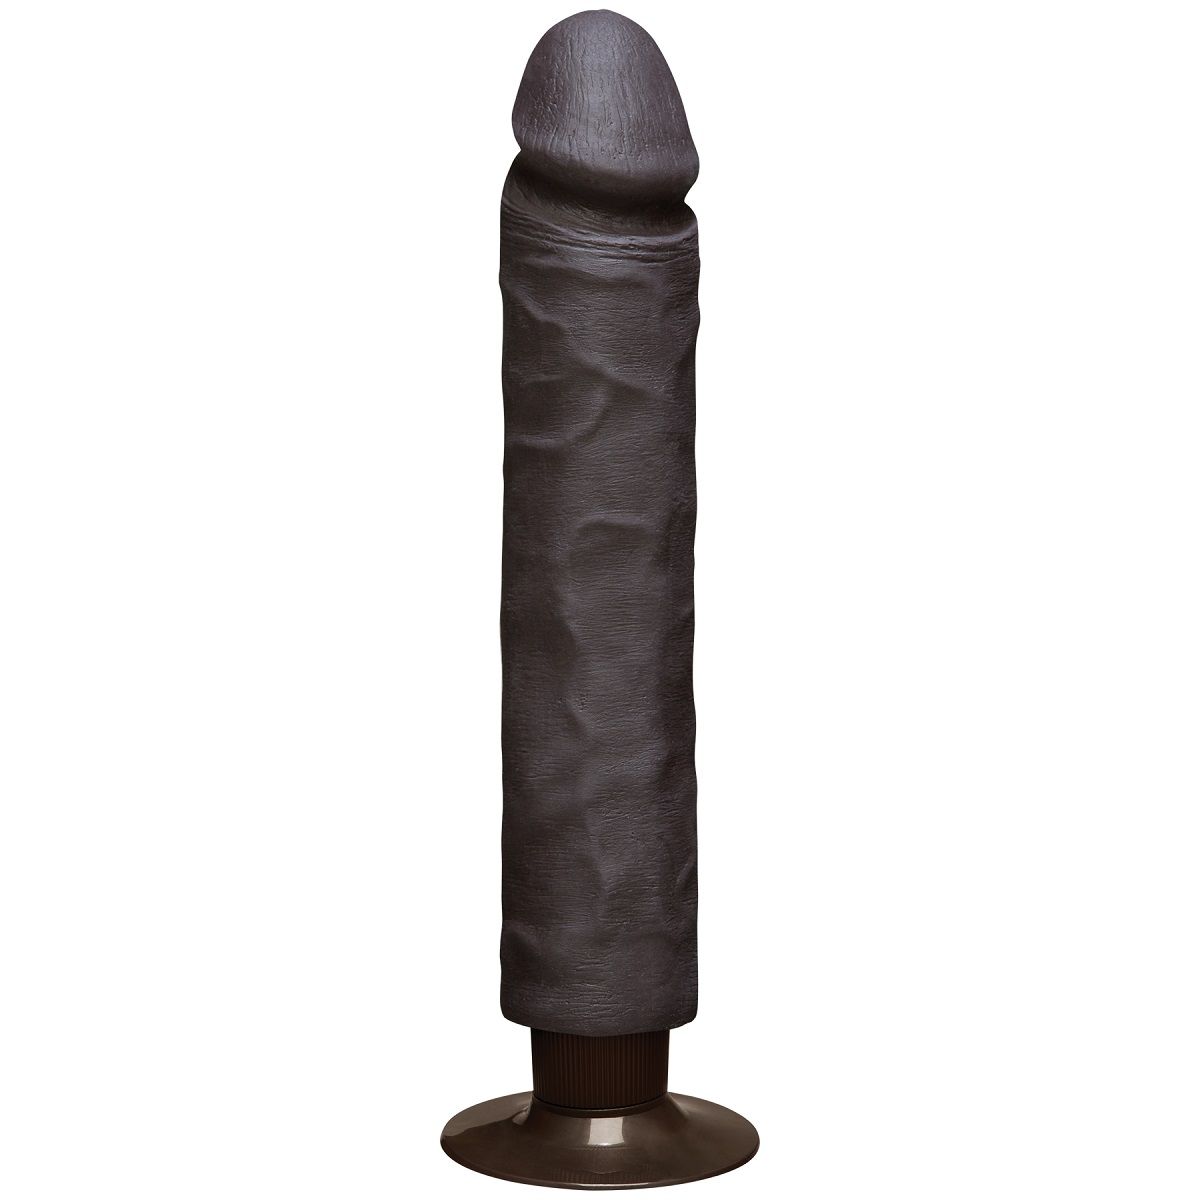   The Realistic Cock ULTRASKYN Without Balls Vibrating 10 - 29,2 .